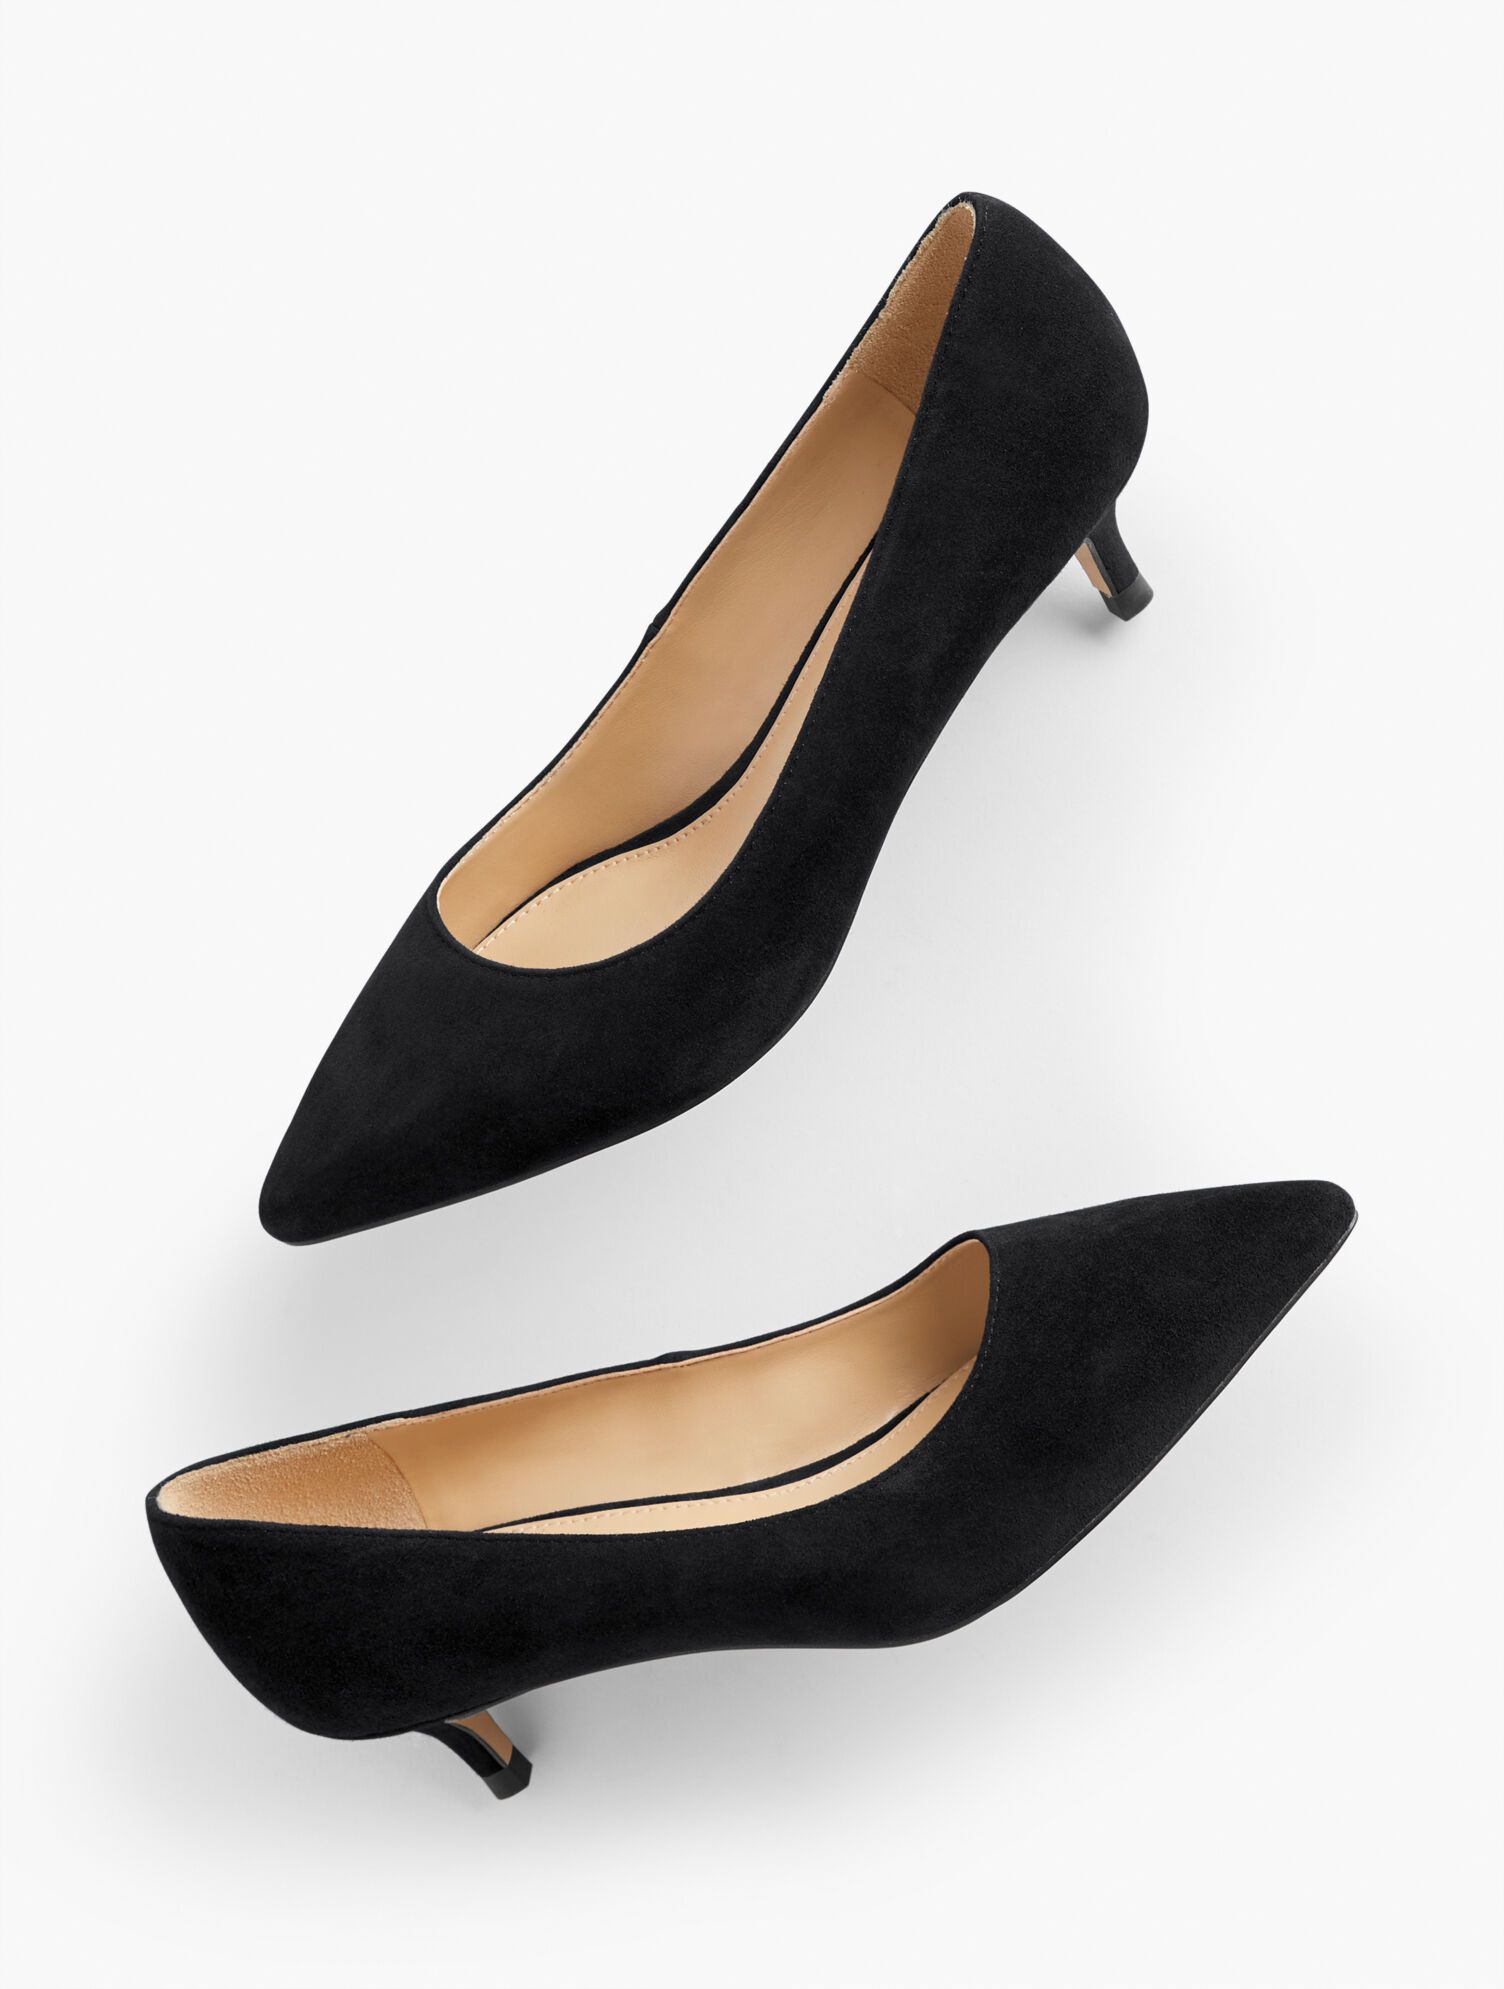 Kitten Heel Pumps For Comfort And
Fashionable Looks